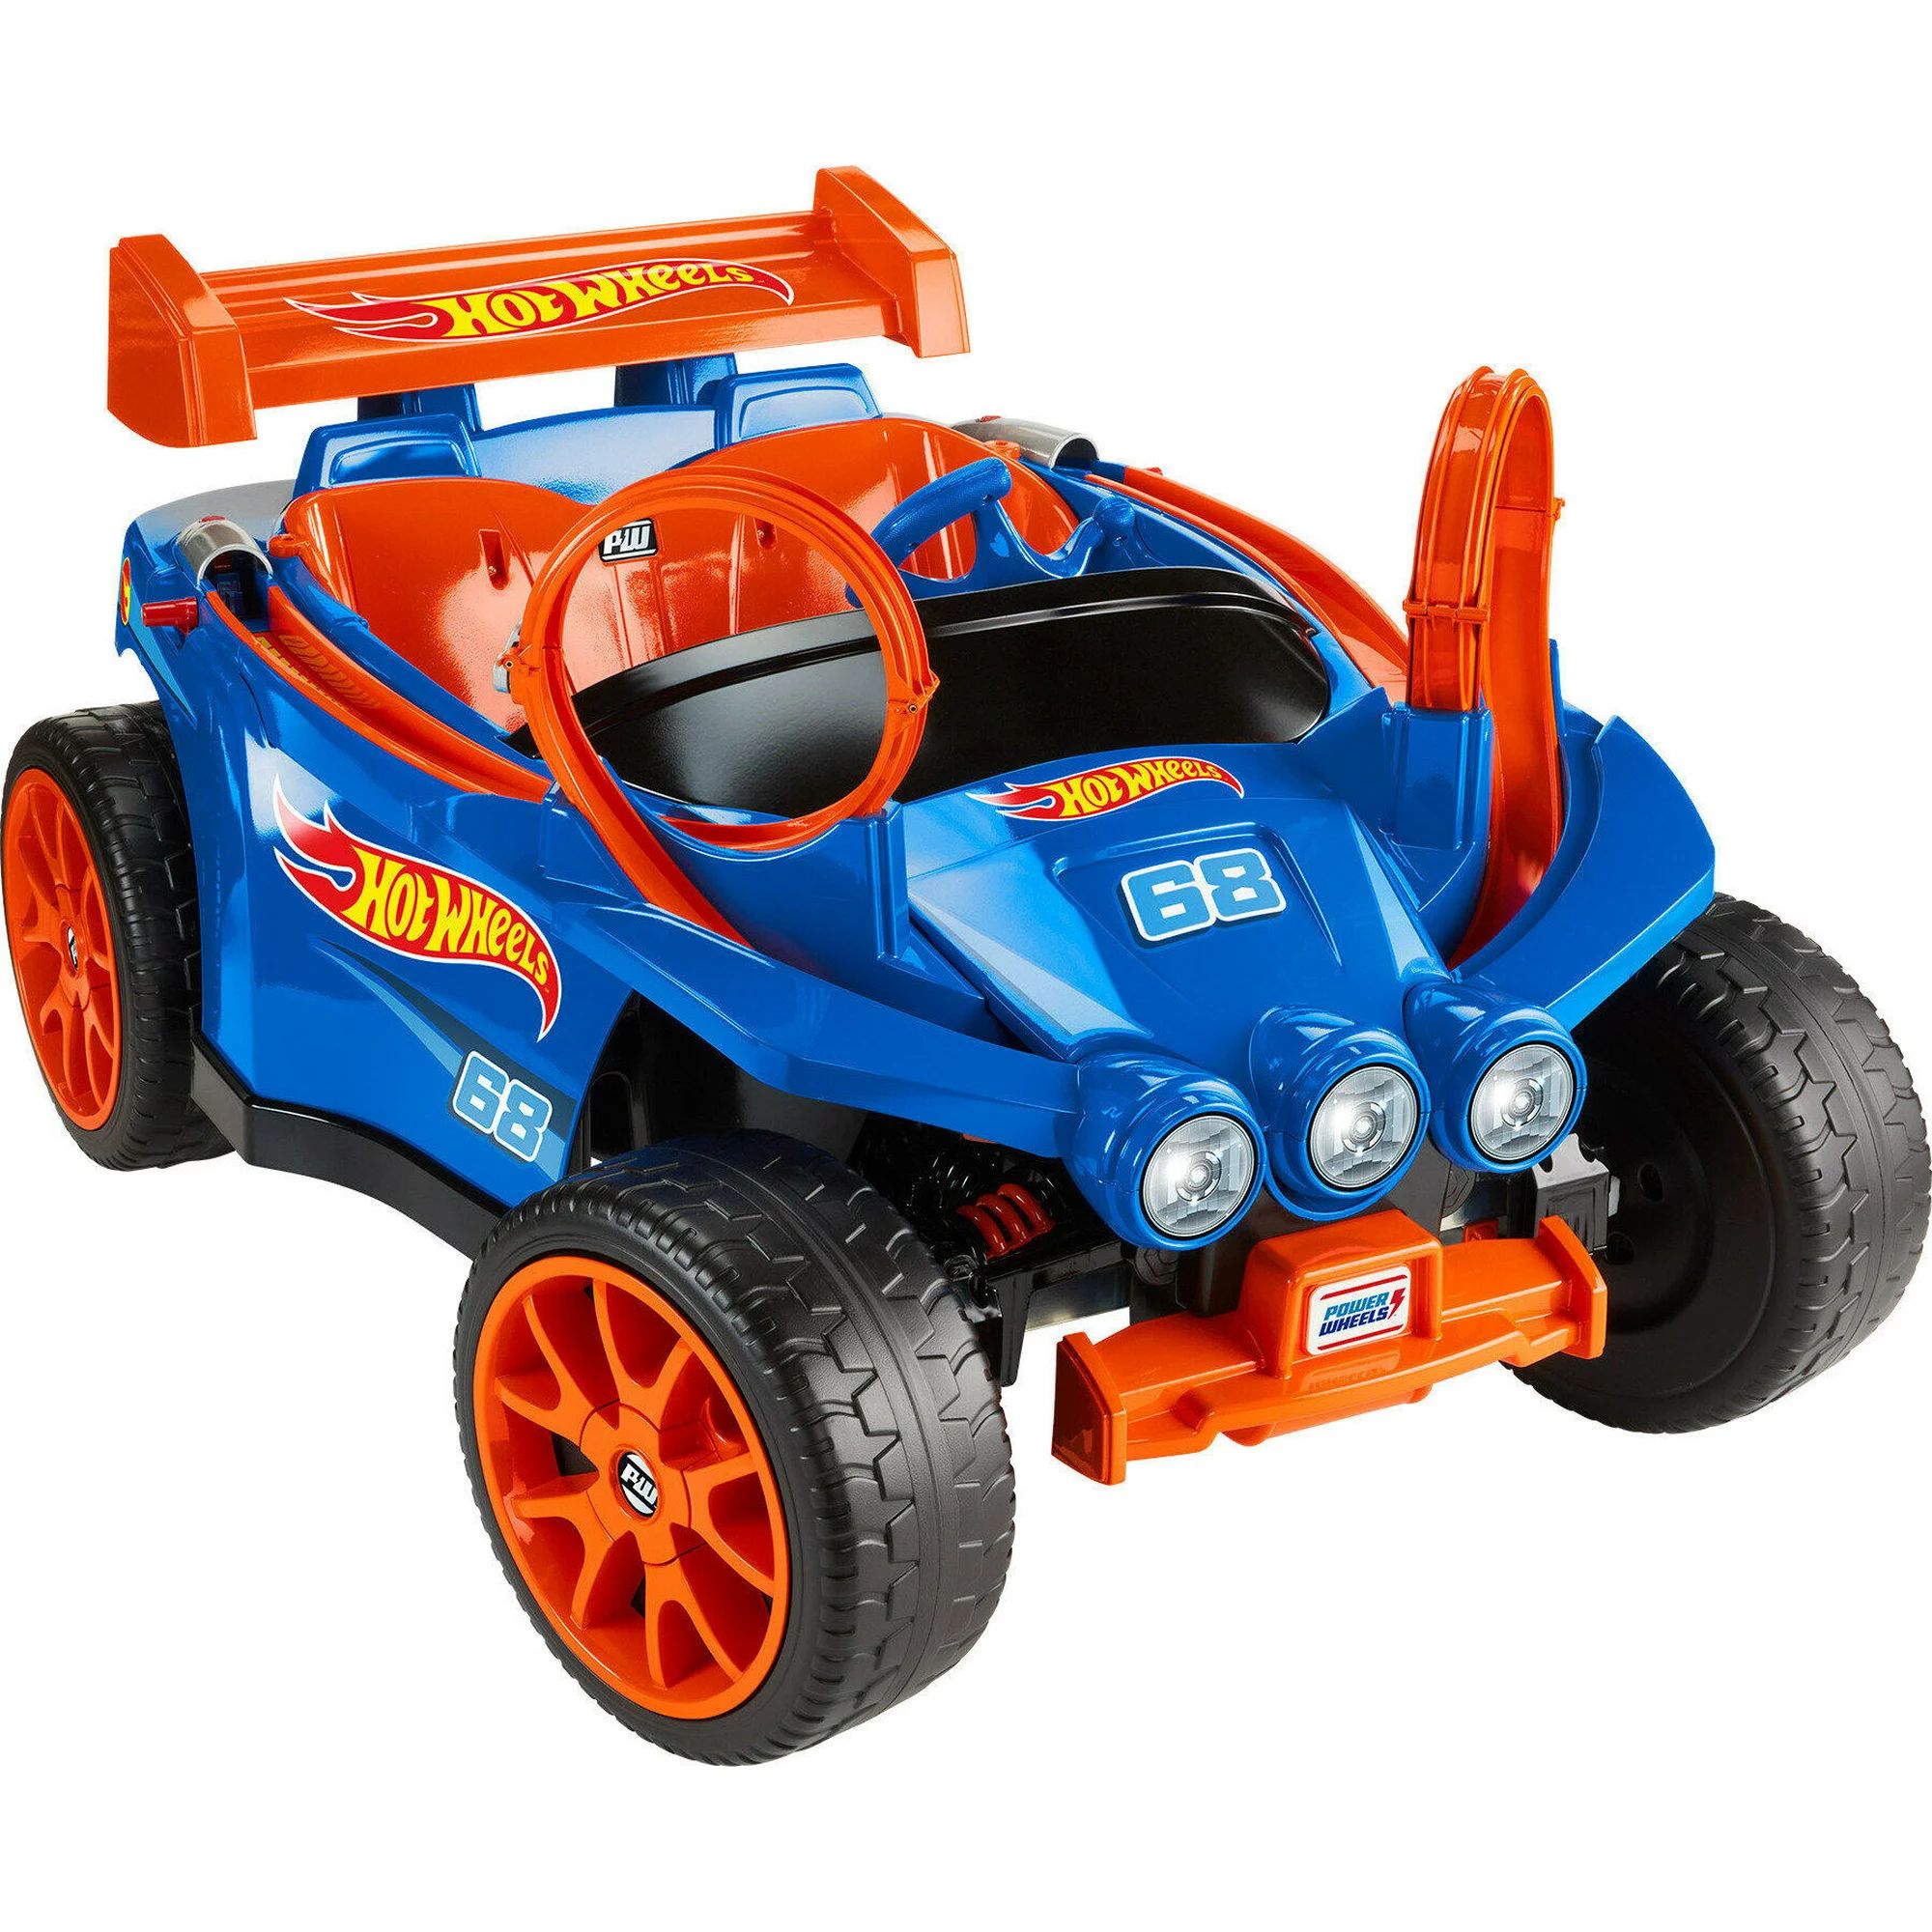 12V Power Wheels Hot Wheels Racer Battery-Powered Ride-On and Vehicle Playset with 5 Toy Cars | Walmart (US)